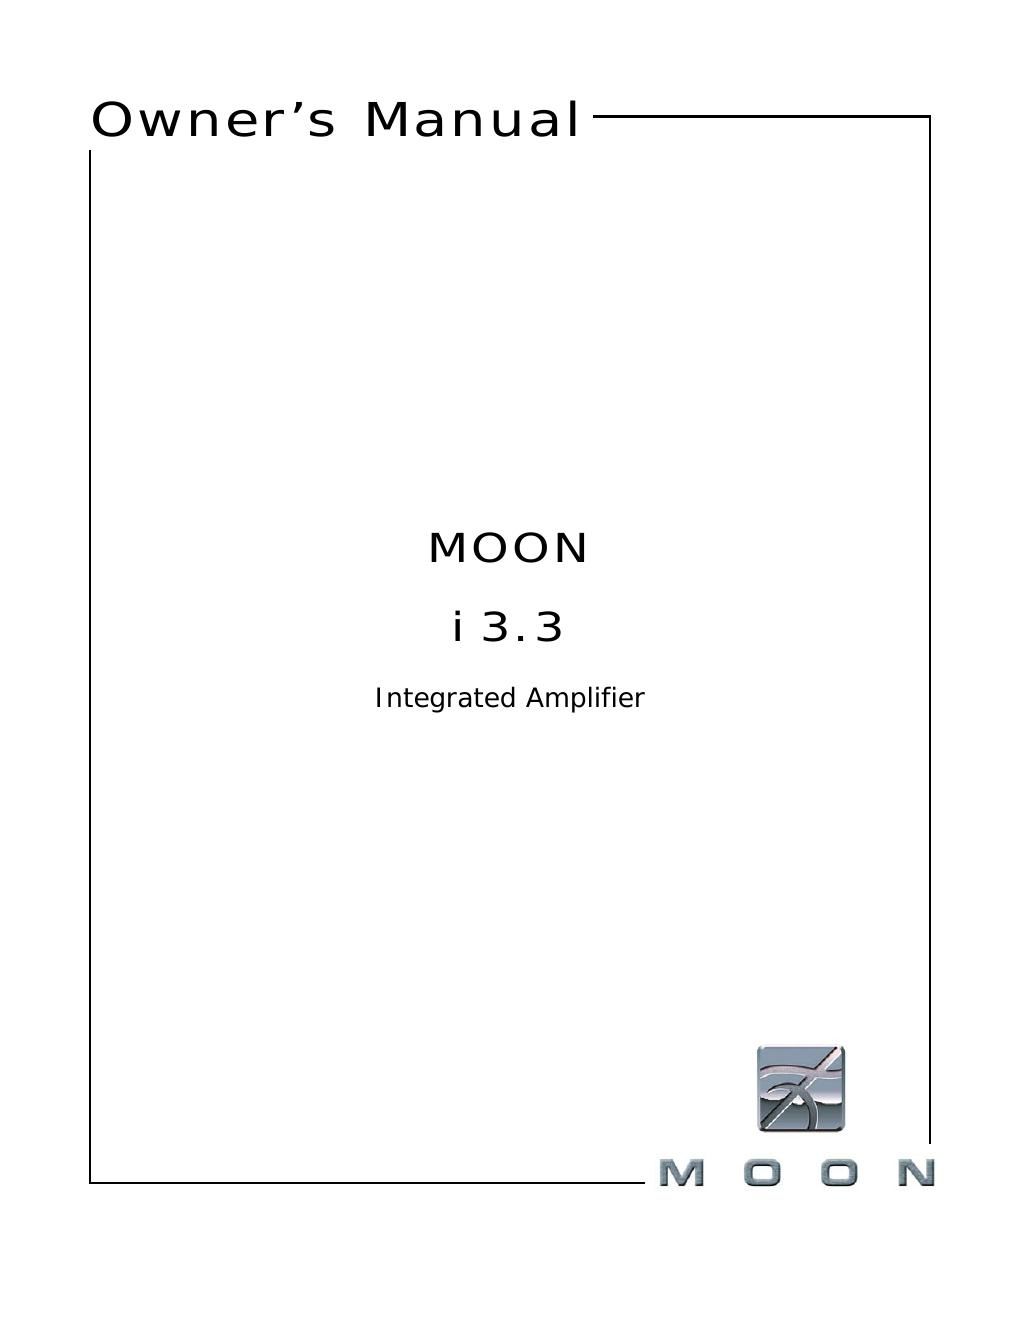 moon i 3 3 owners manual